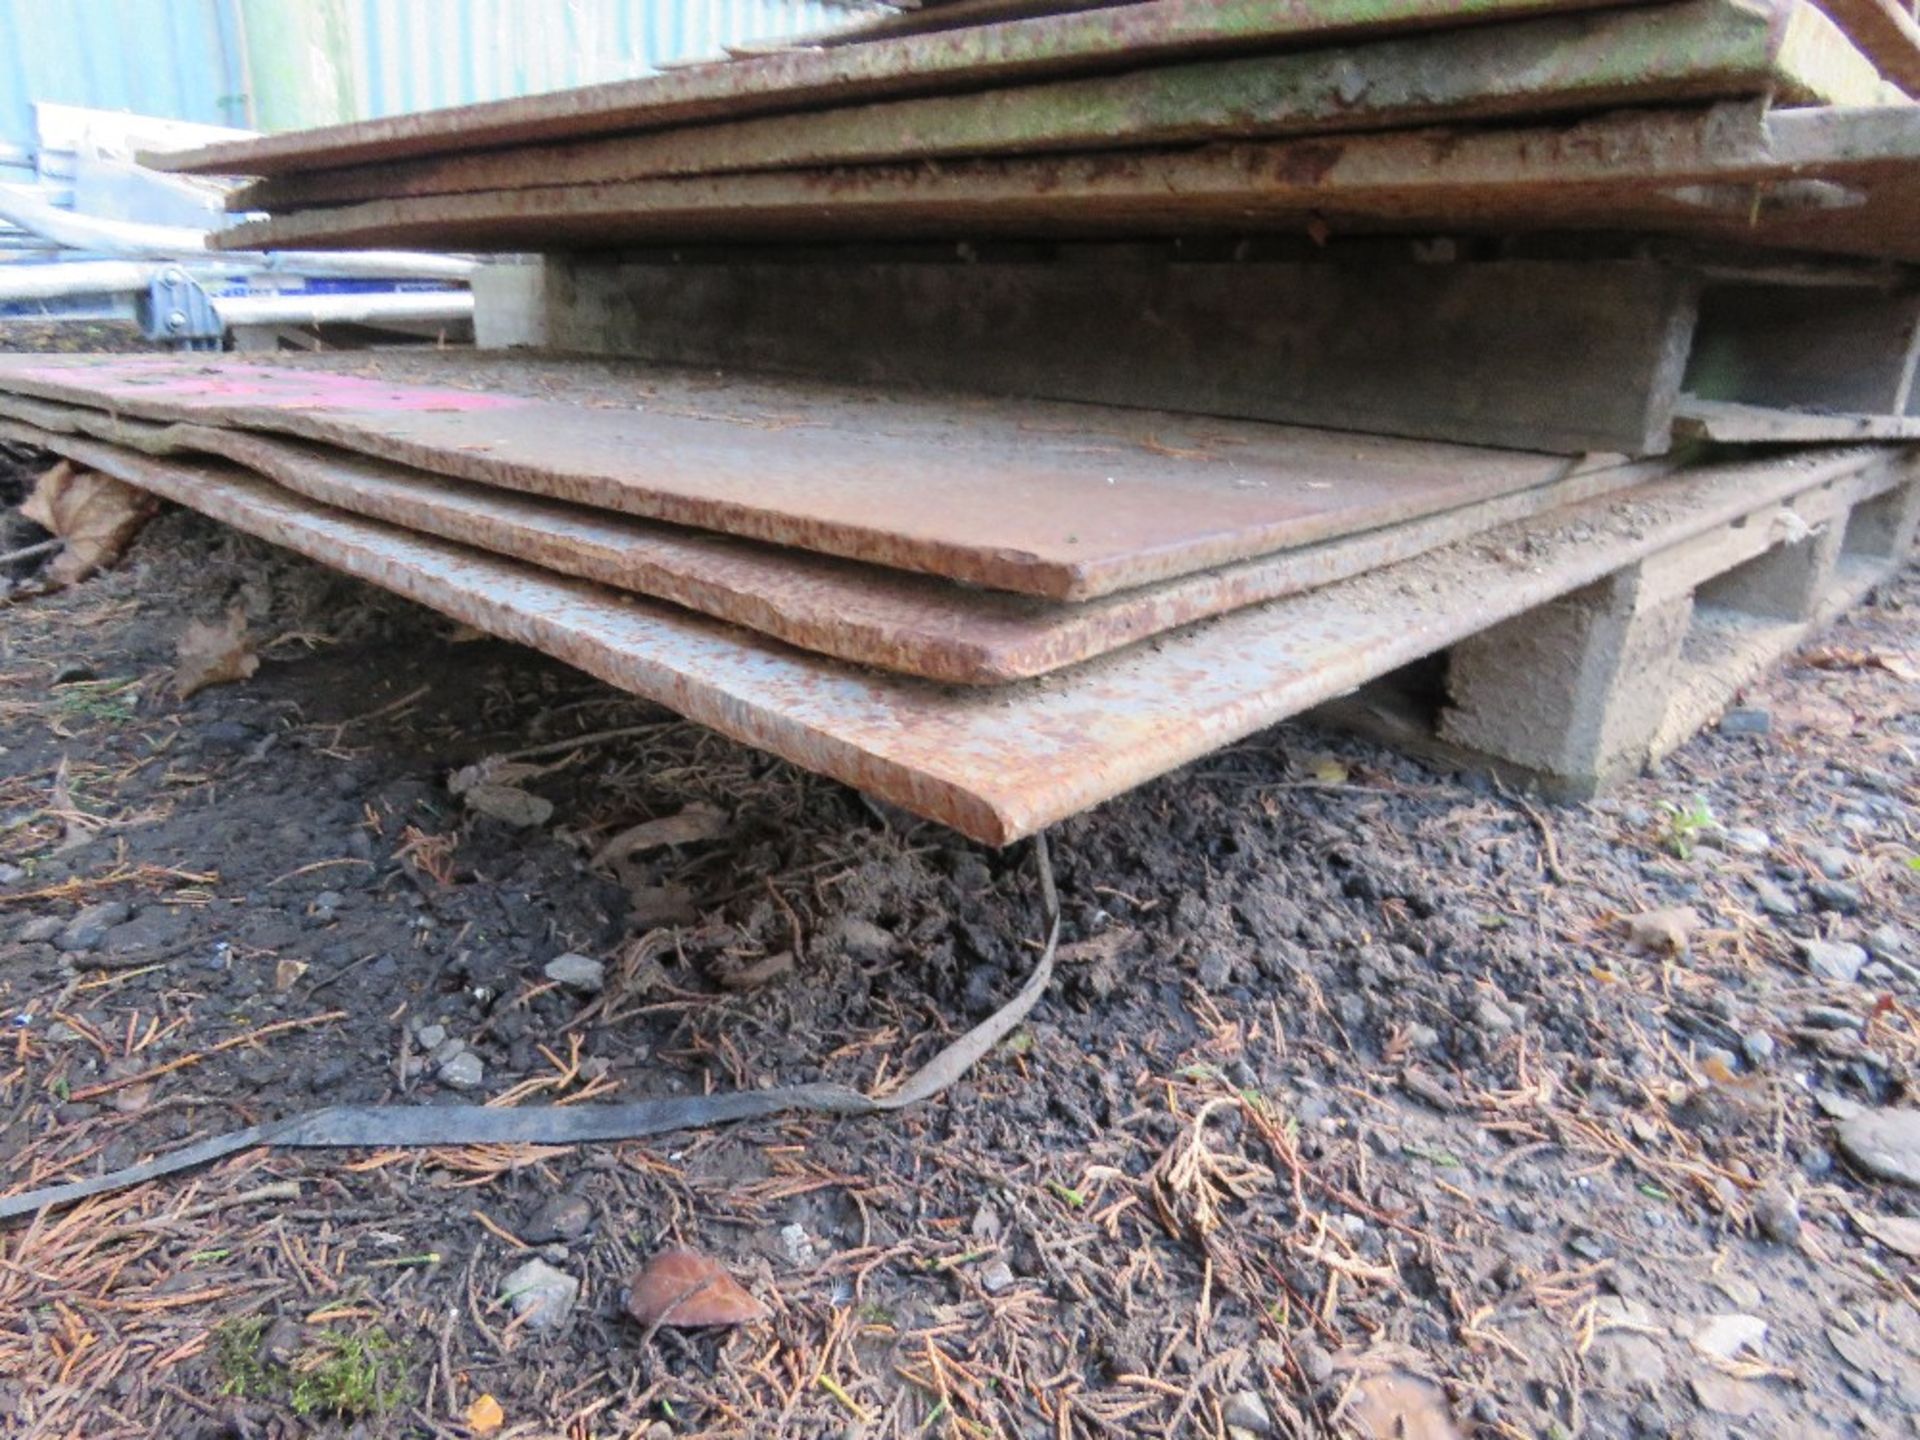 3 X HEAVY STEEL ROAD PLATES: 2.4M X 1.2M APPROX @ 12MM THICKNESS APPROX. - Image 2 of 3